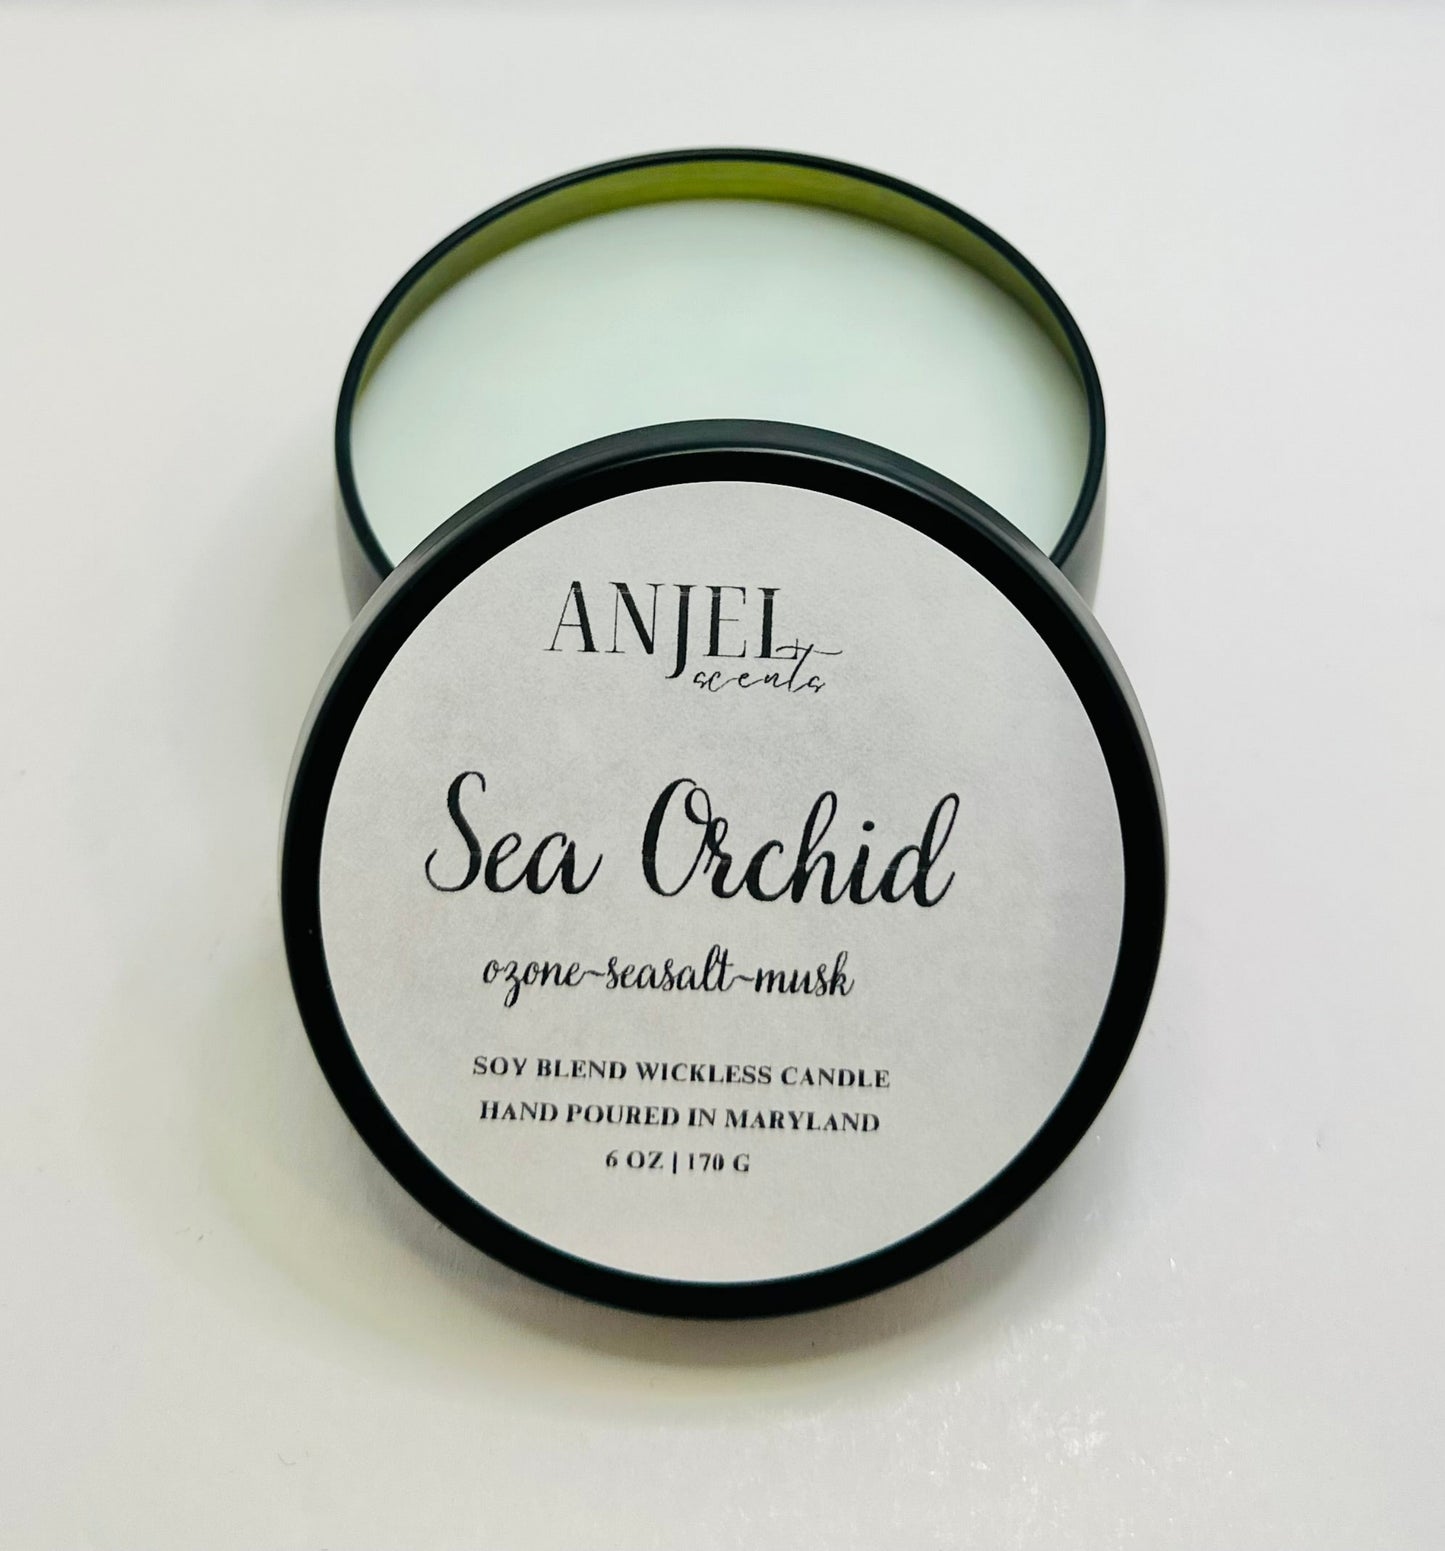 Sea Orchid Wickless Candle Tin